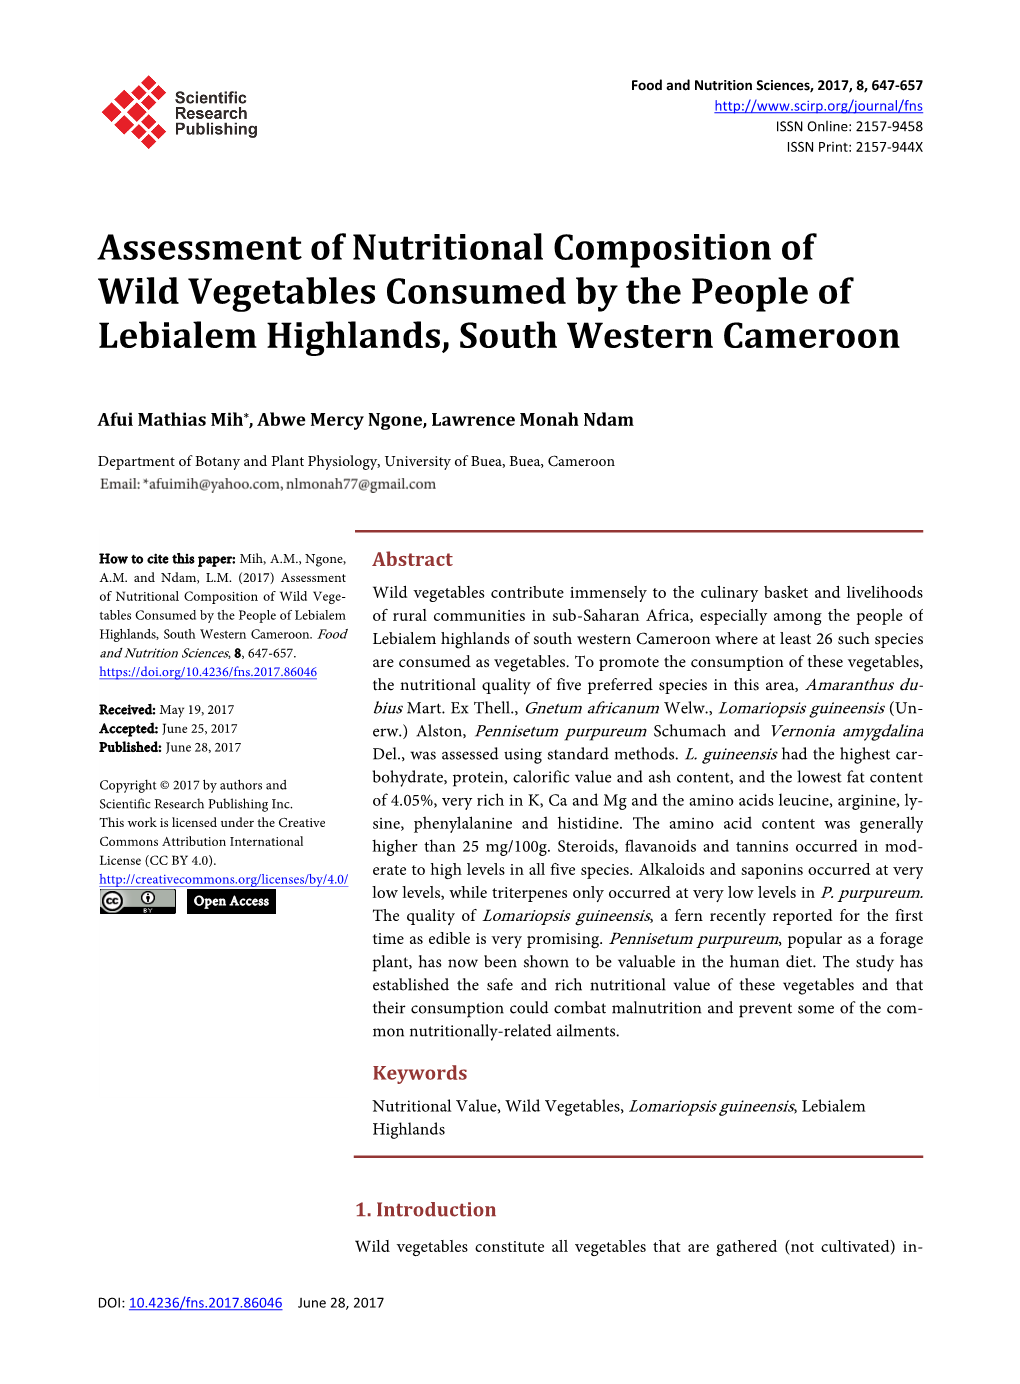 Assessment of Nutritional Composition of Wild Vegetables Consumed by the People of Lebialem Highlands, South Western Cameroon